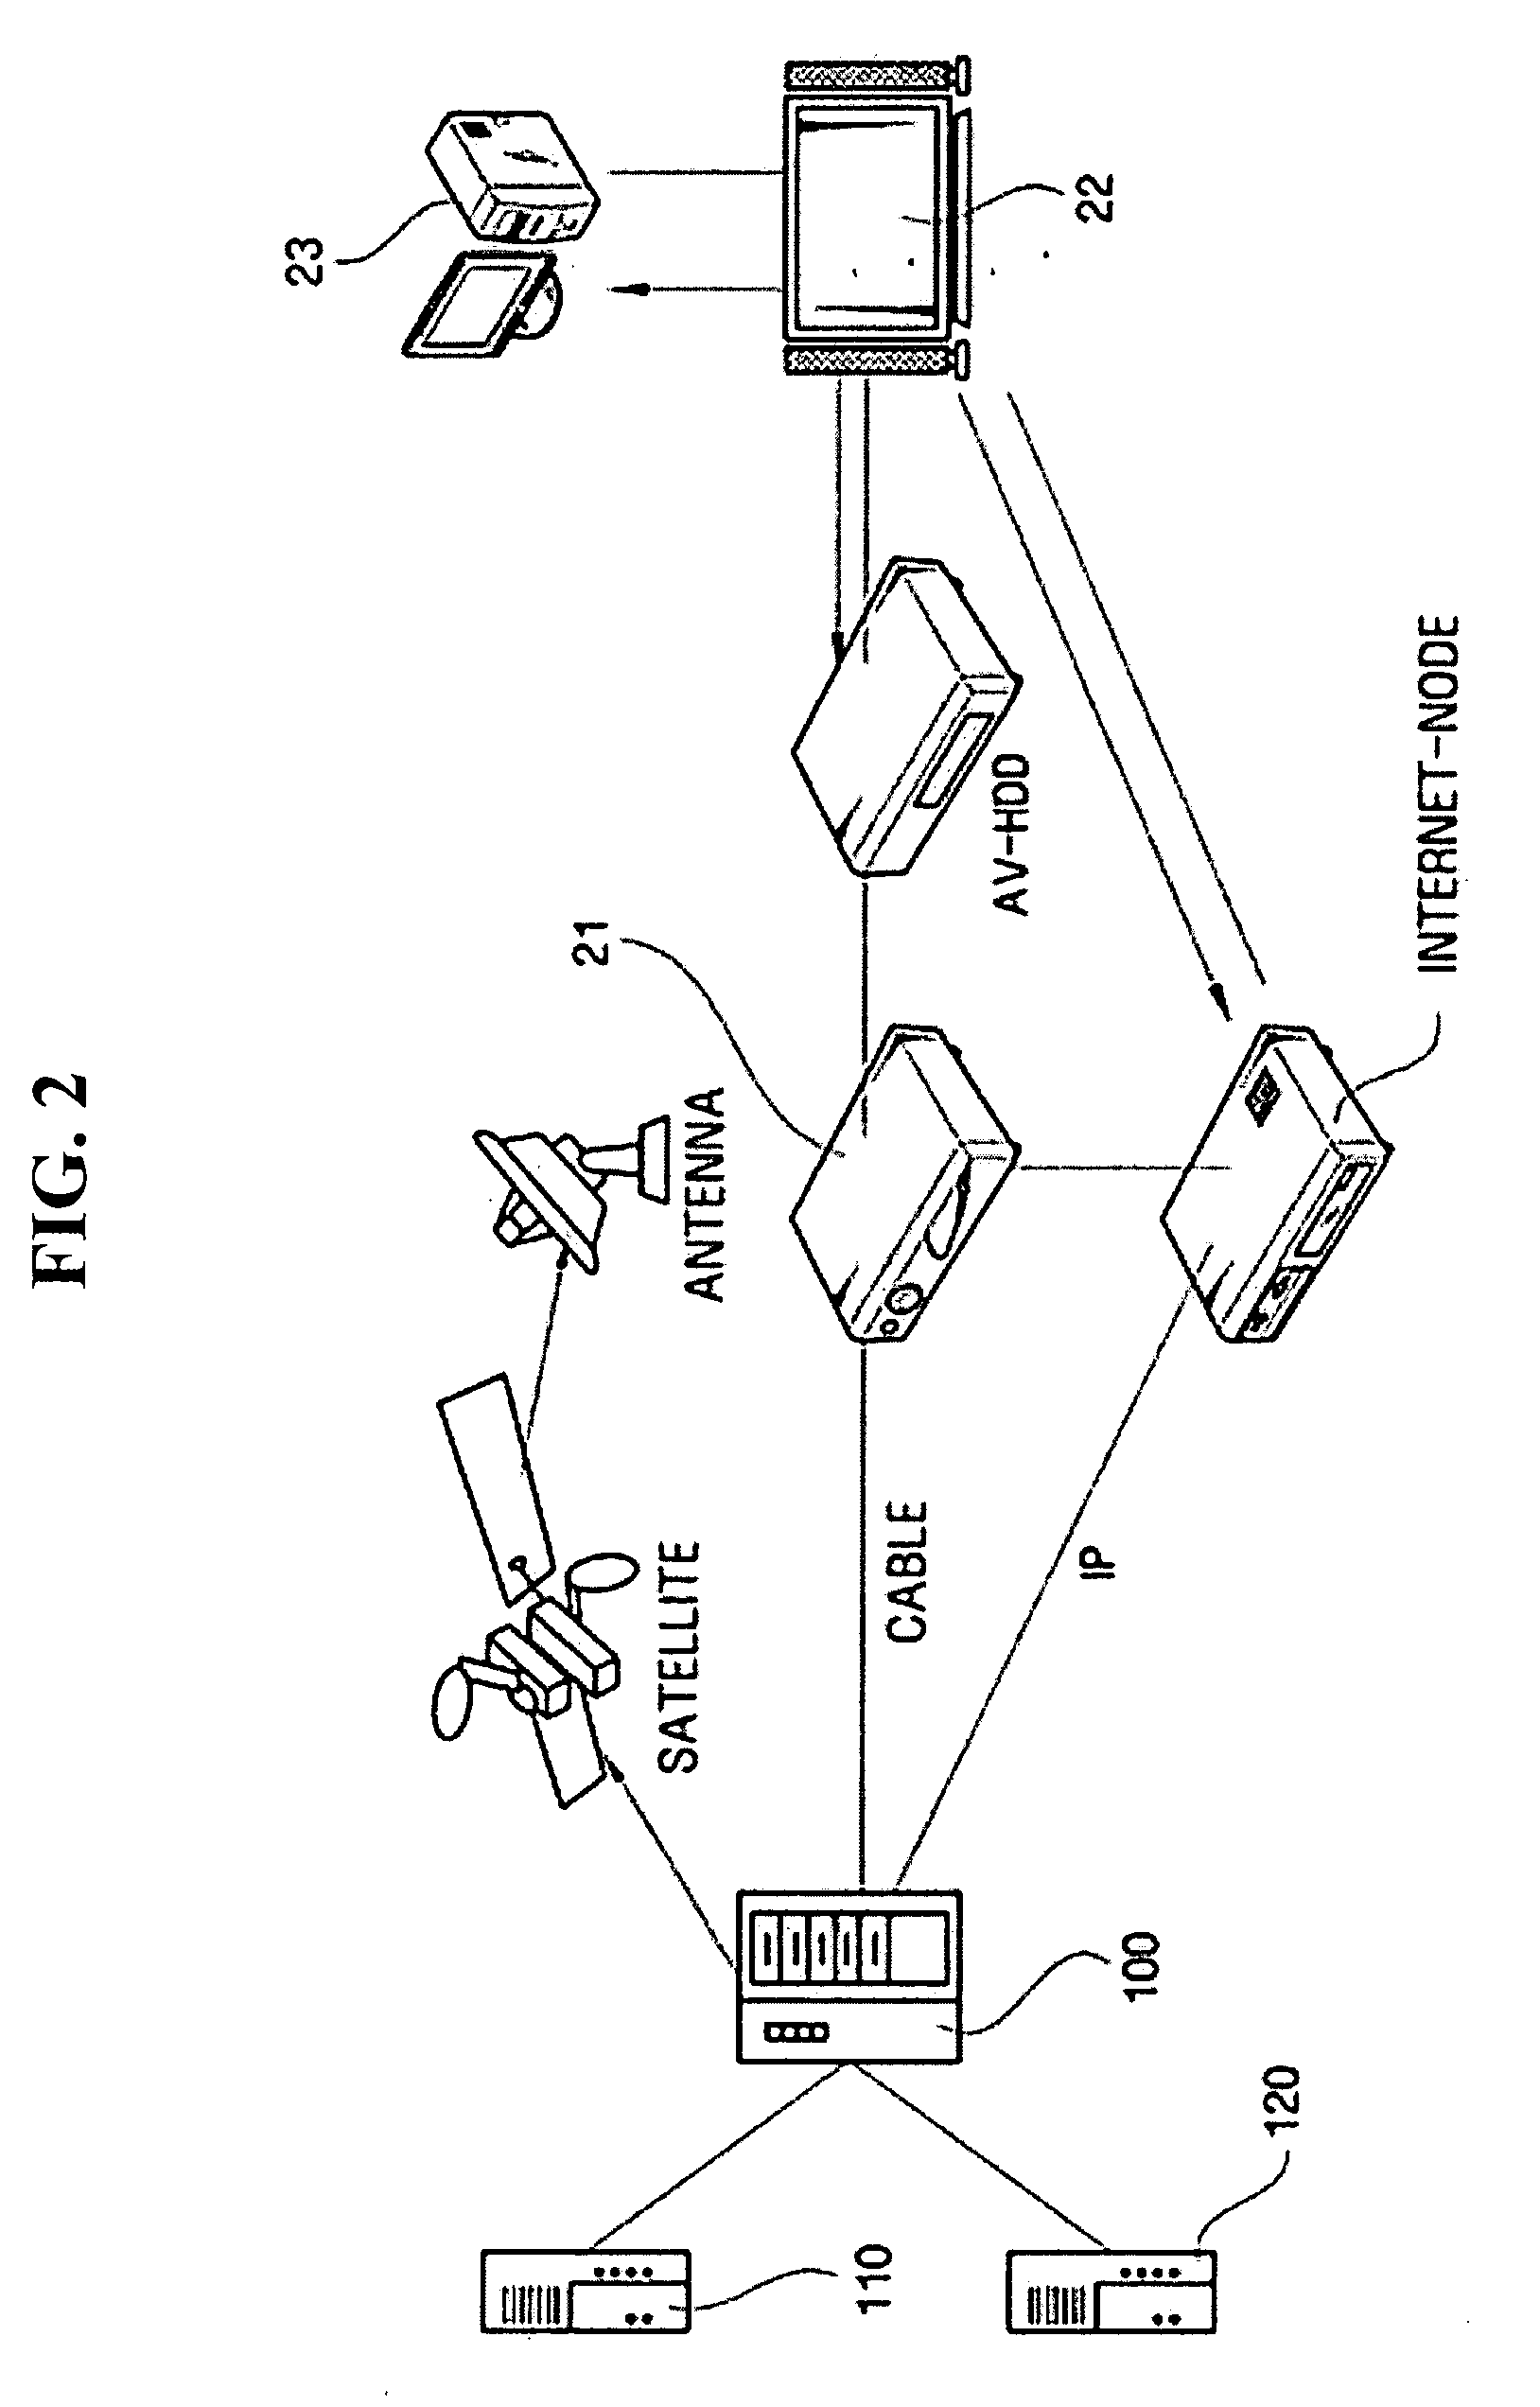 Apparatus and method for providing available codec information